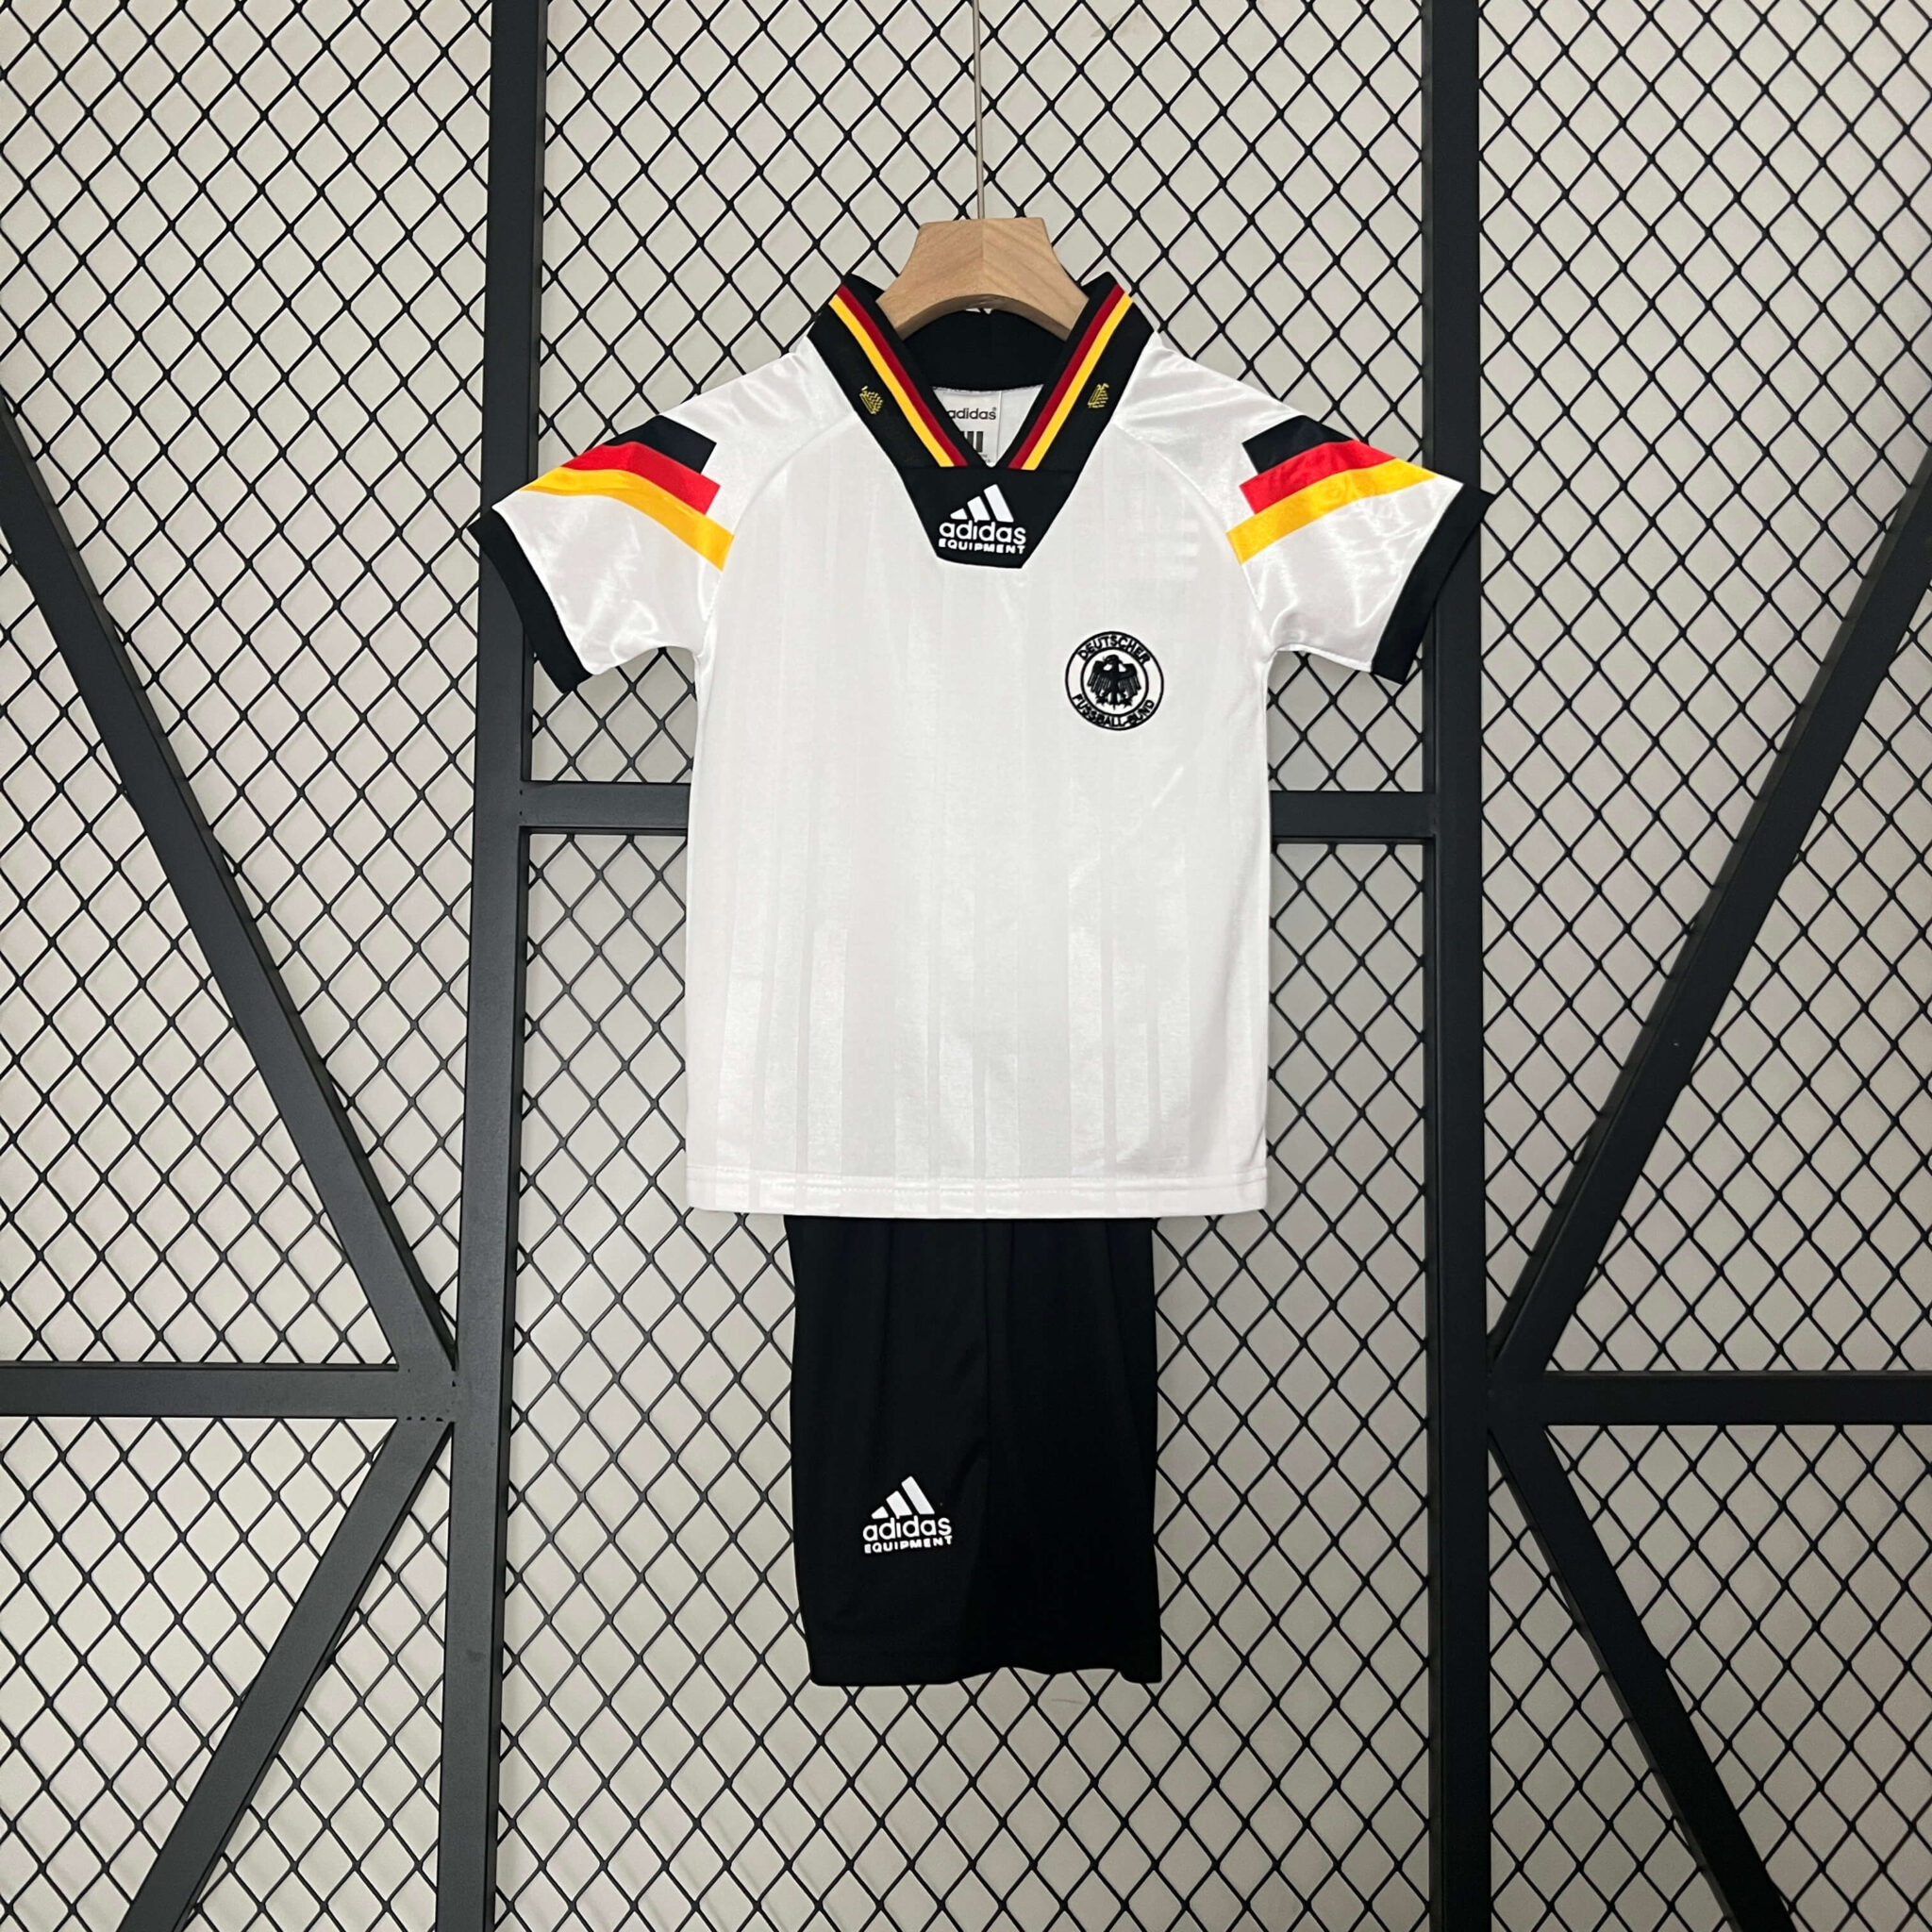 Germany 1992 Home Retro jersey for Kids